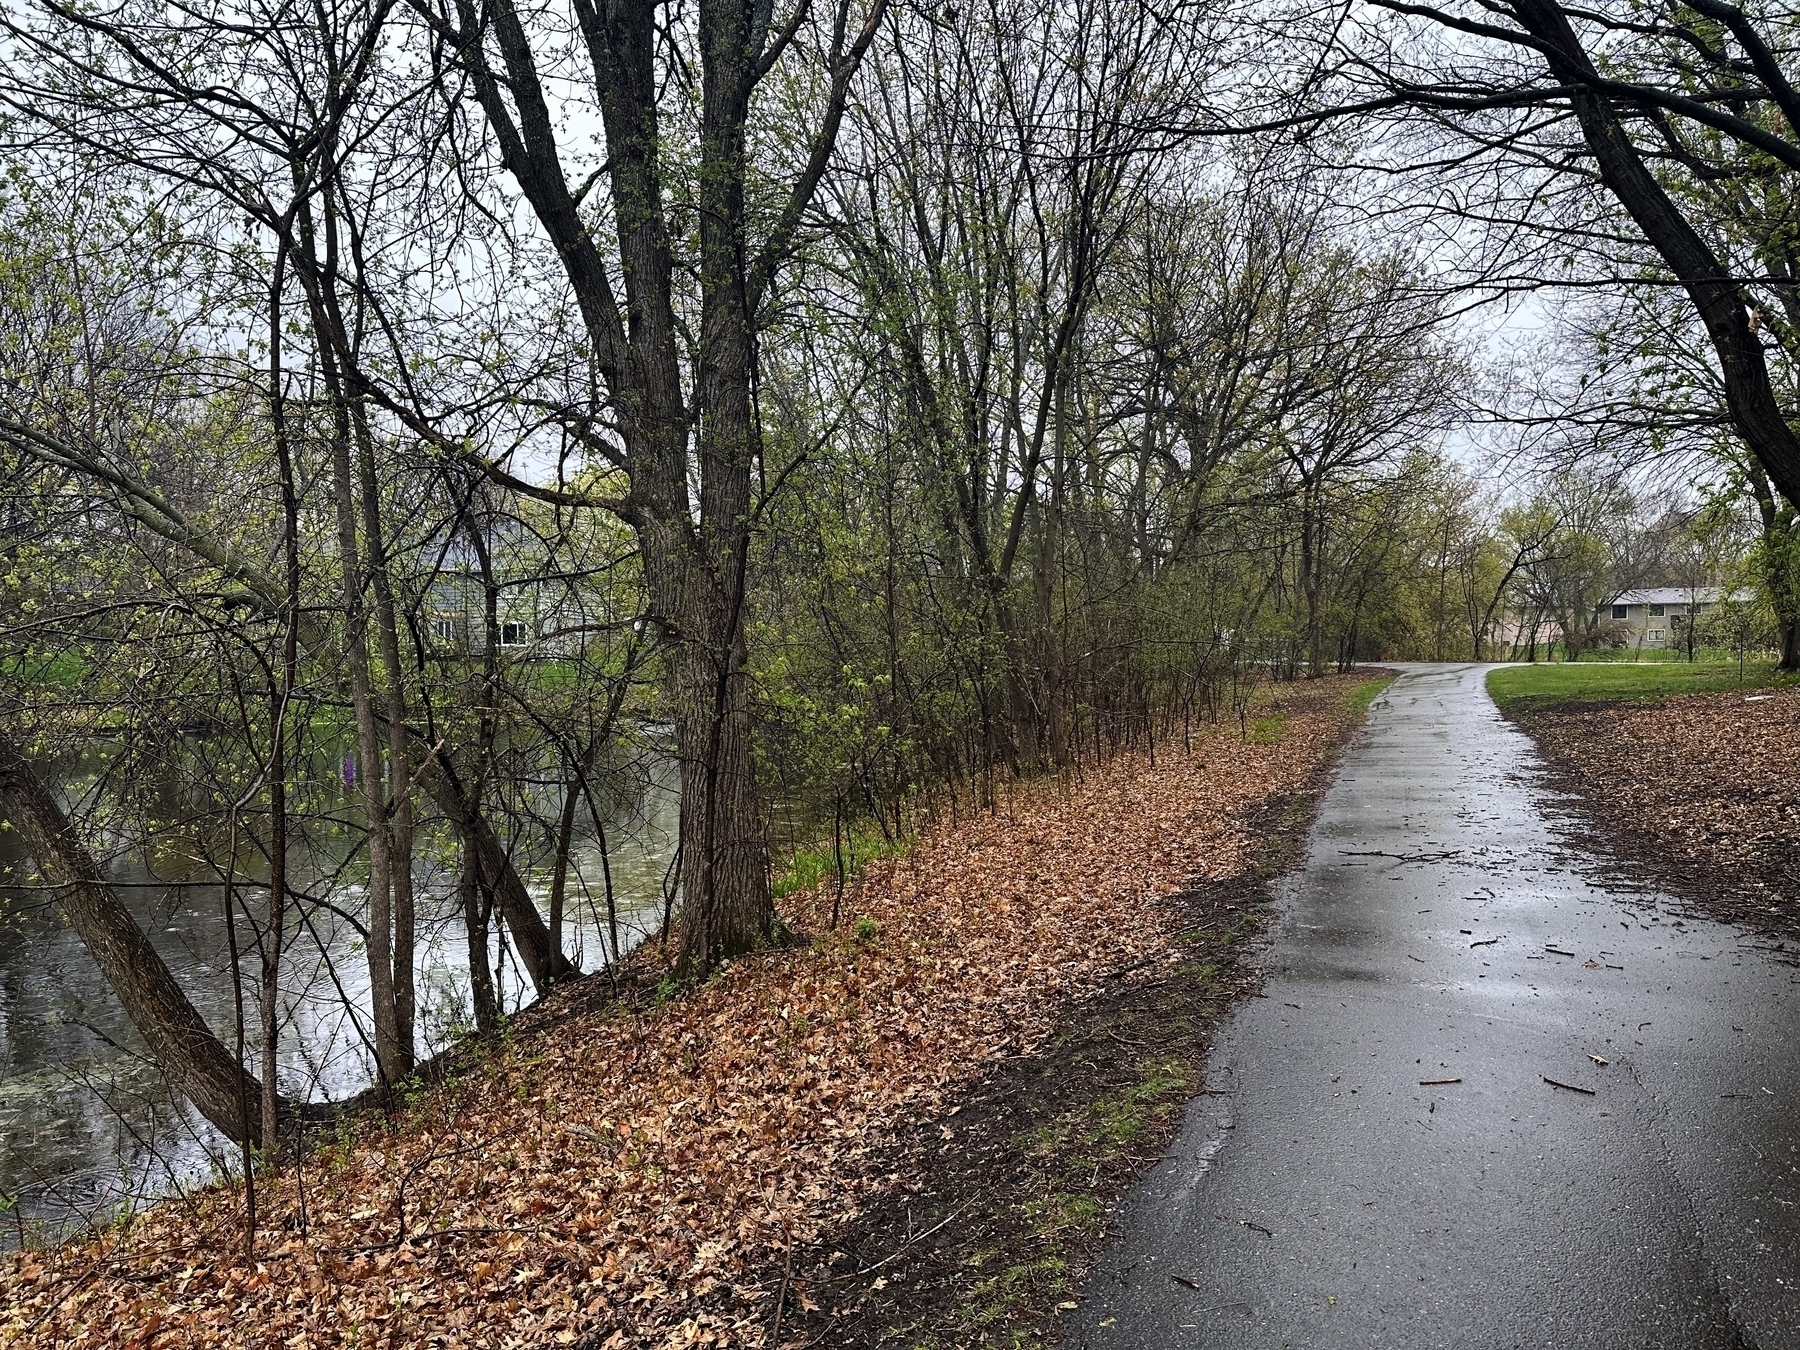 A wet pathway meanders through a leaf-strewn park with budding trees beside a river, under an overcast sky.